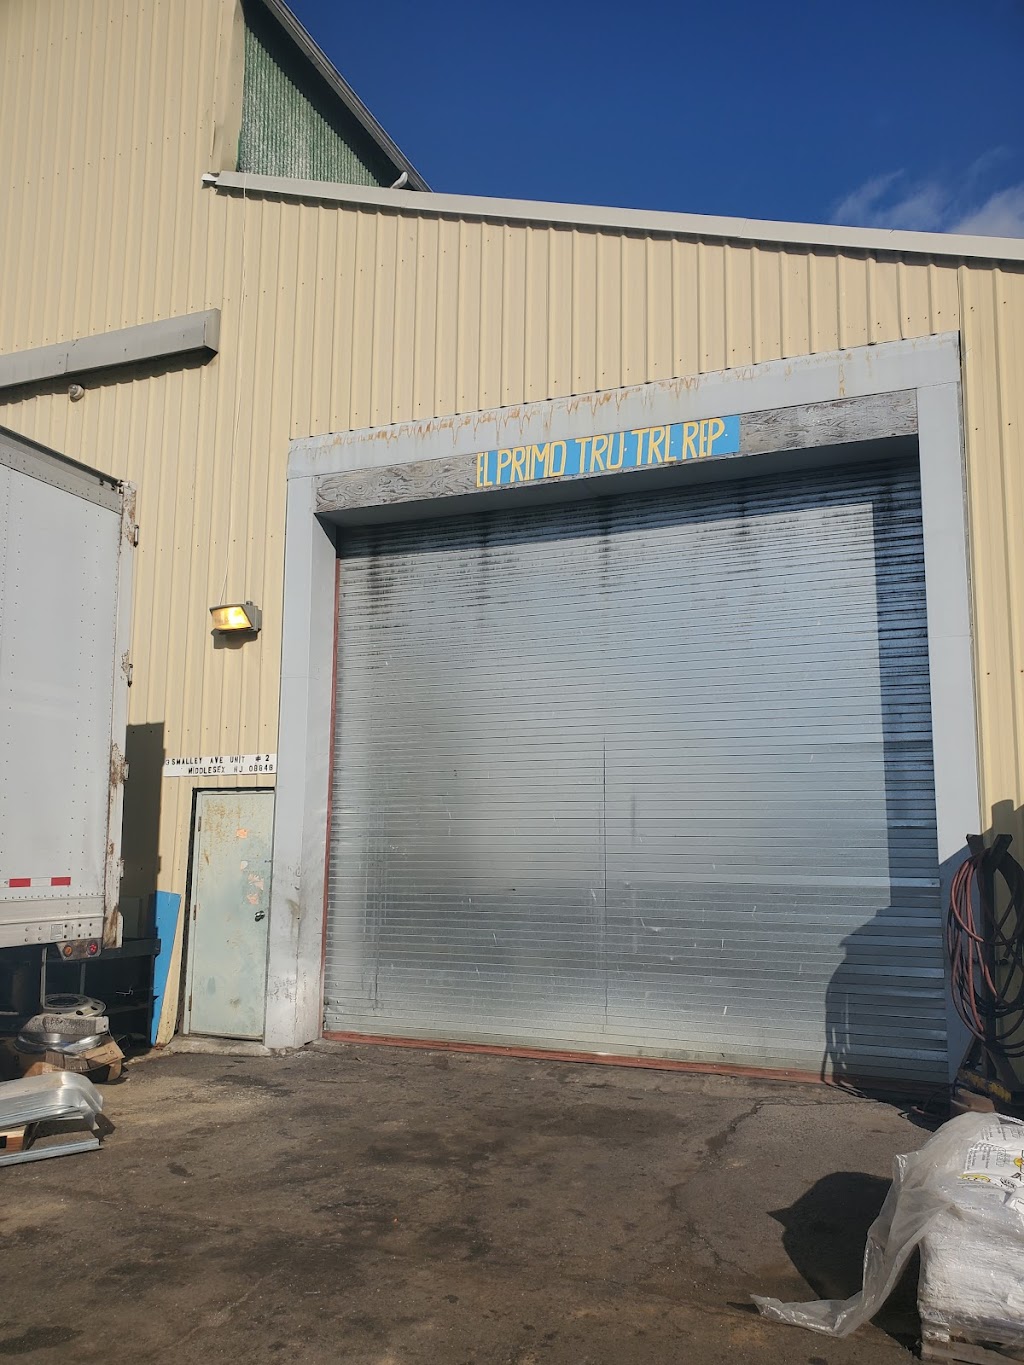 El Primo Truck Trailer Repair | 3 Smalley Ave unit #2, Middlesex, NJ 08846 | Phone: (973) 985-7930